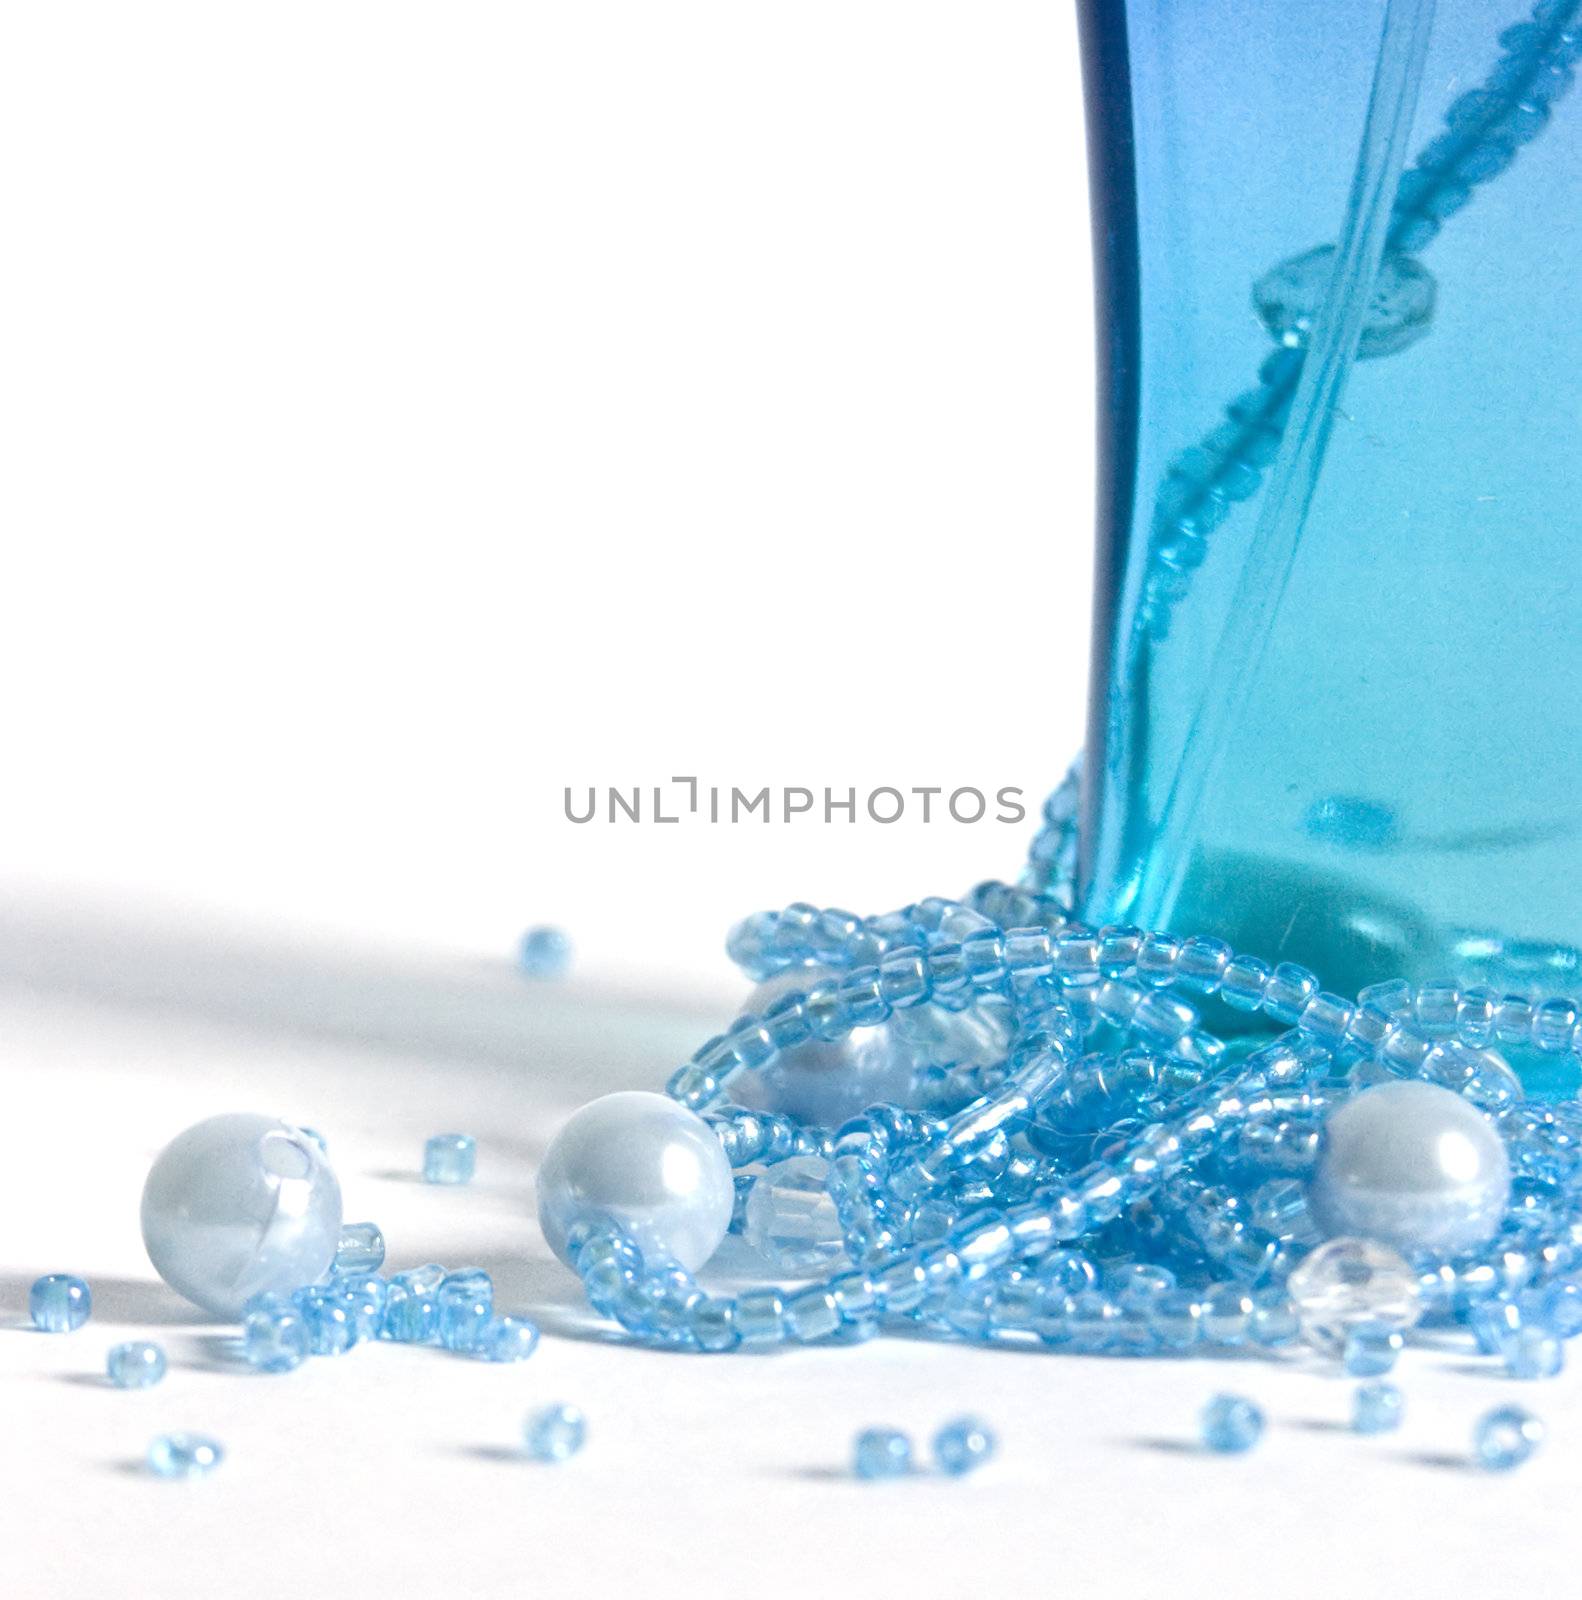 The image of a bottle with perfumery water and the scattered thread of a beads